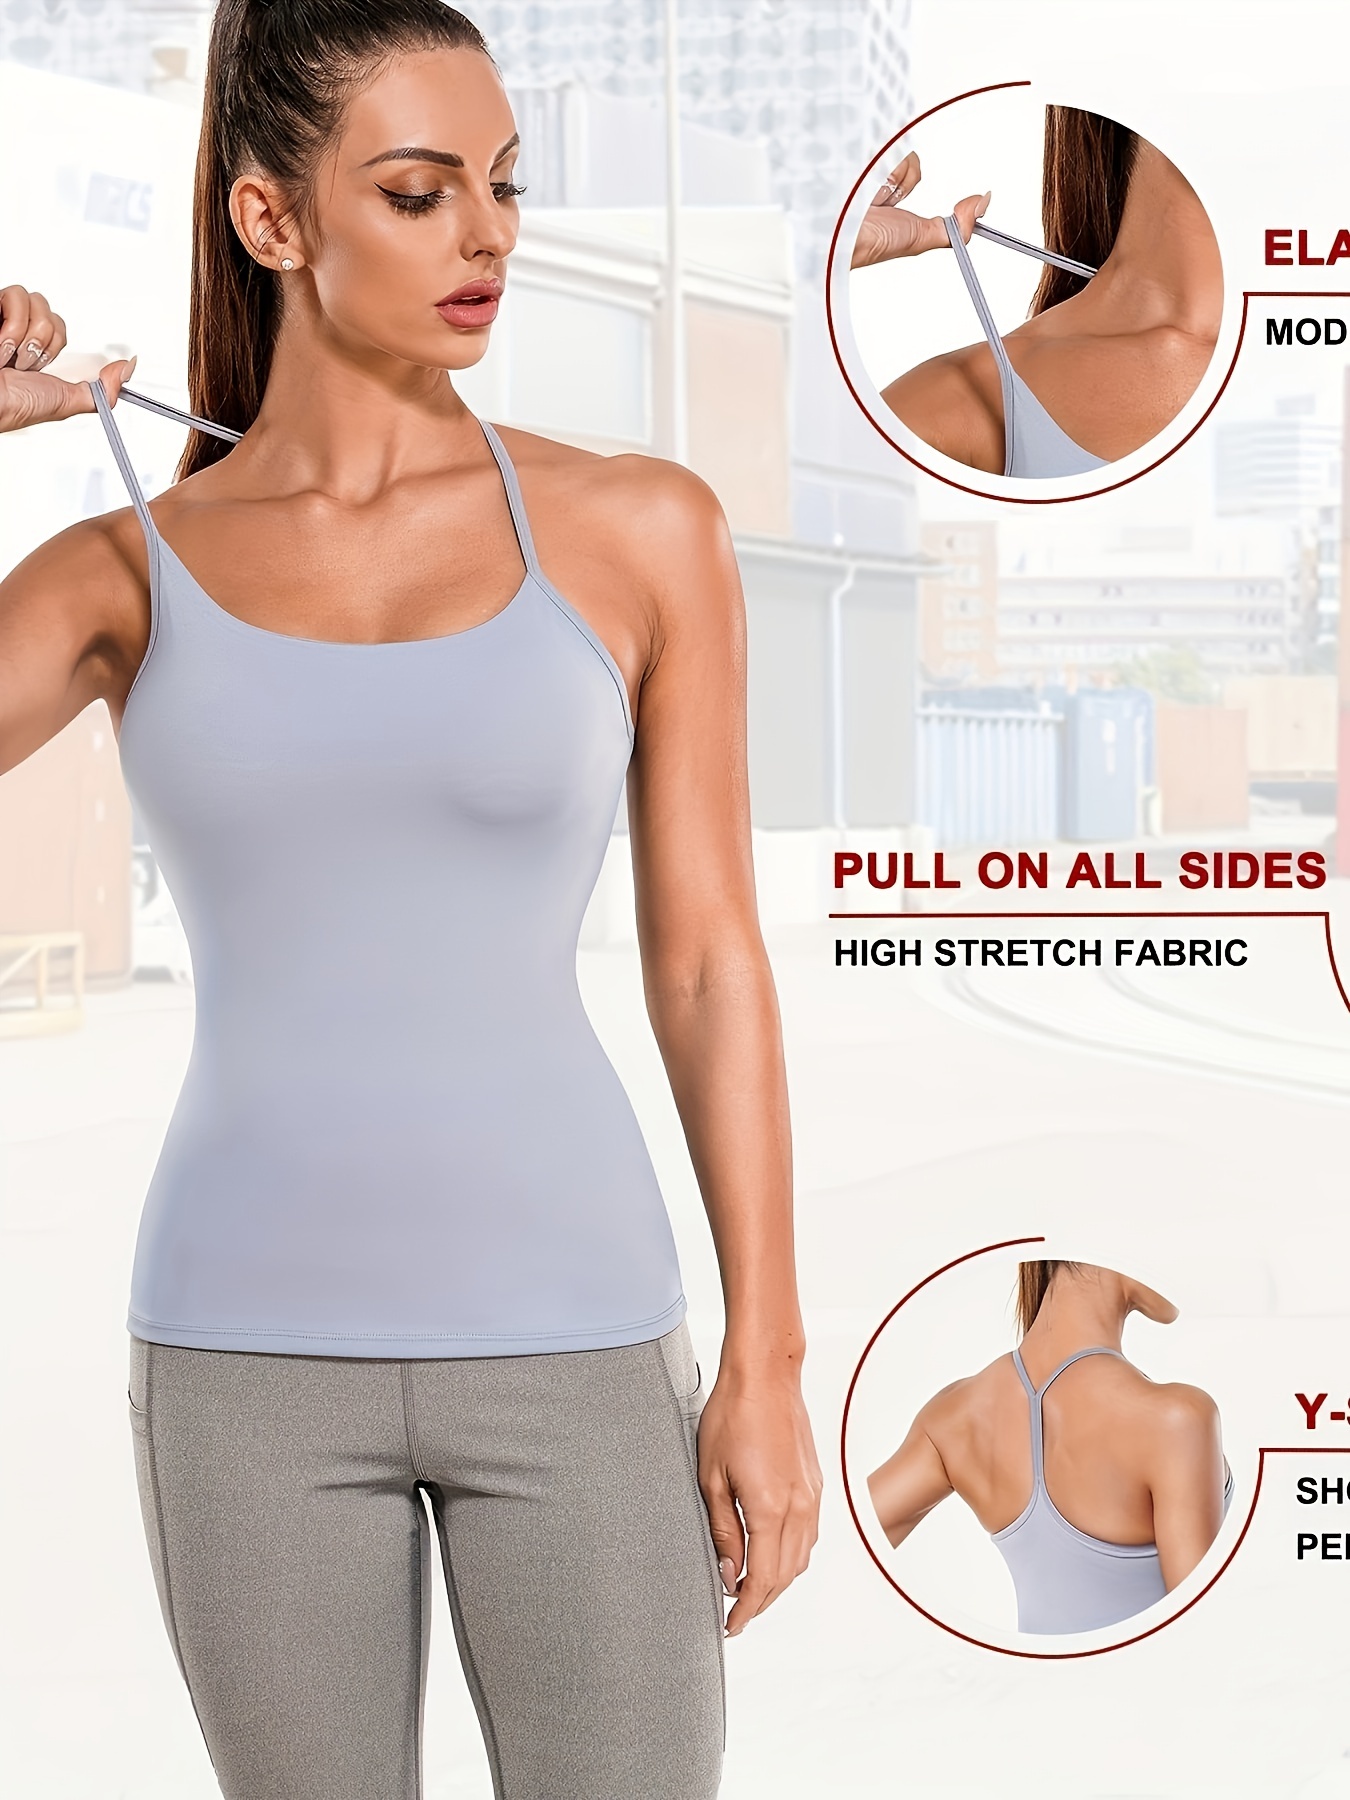 Workout Tank Tops For Women, Built In Bra Cami Top Yoga Shirts, Athletic  Racerback Tank Running Sports Clothes